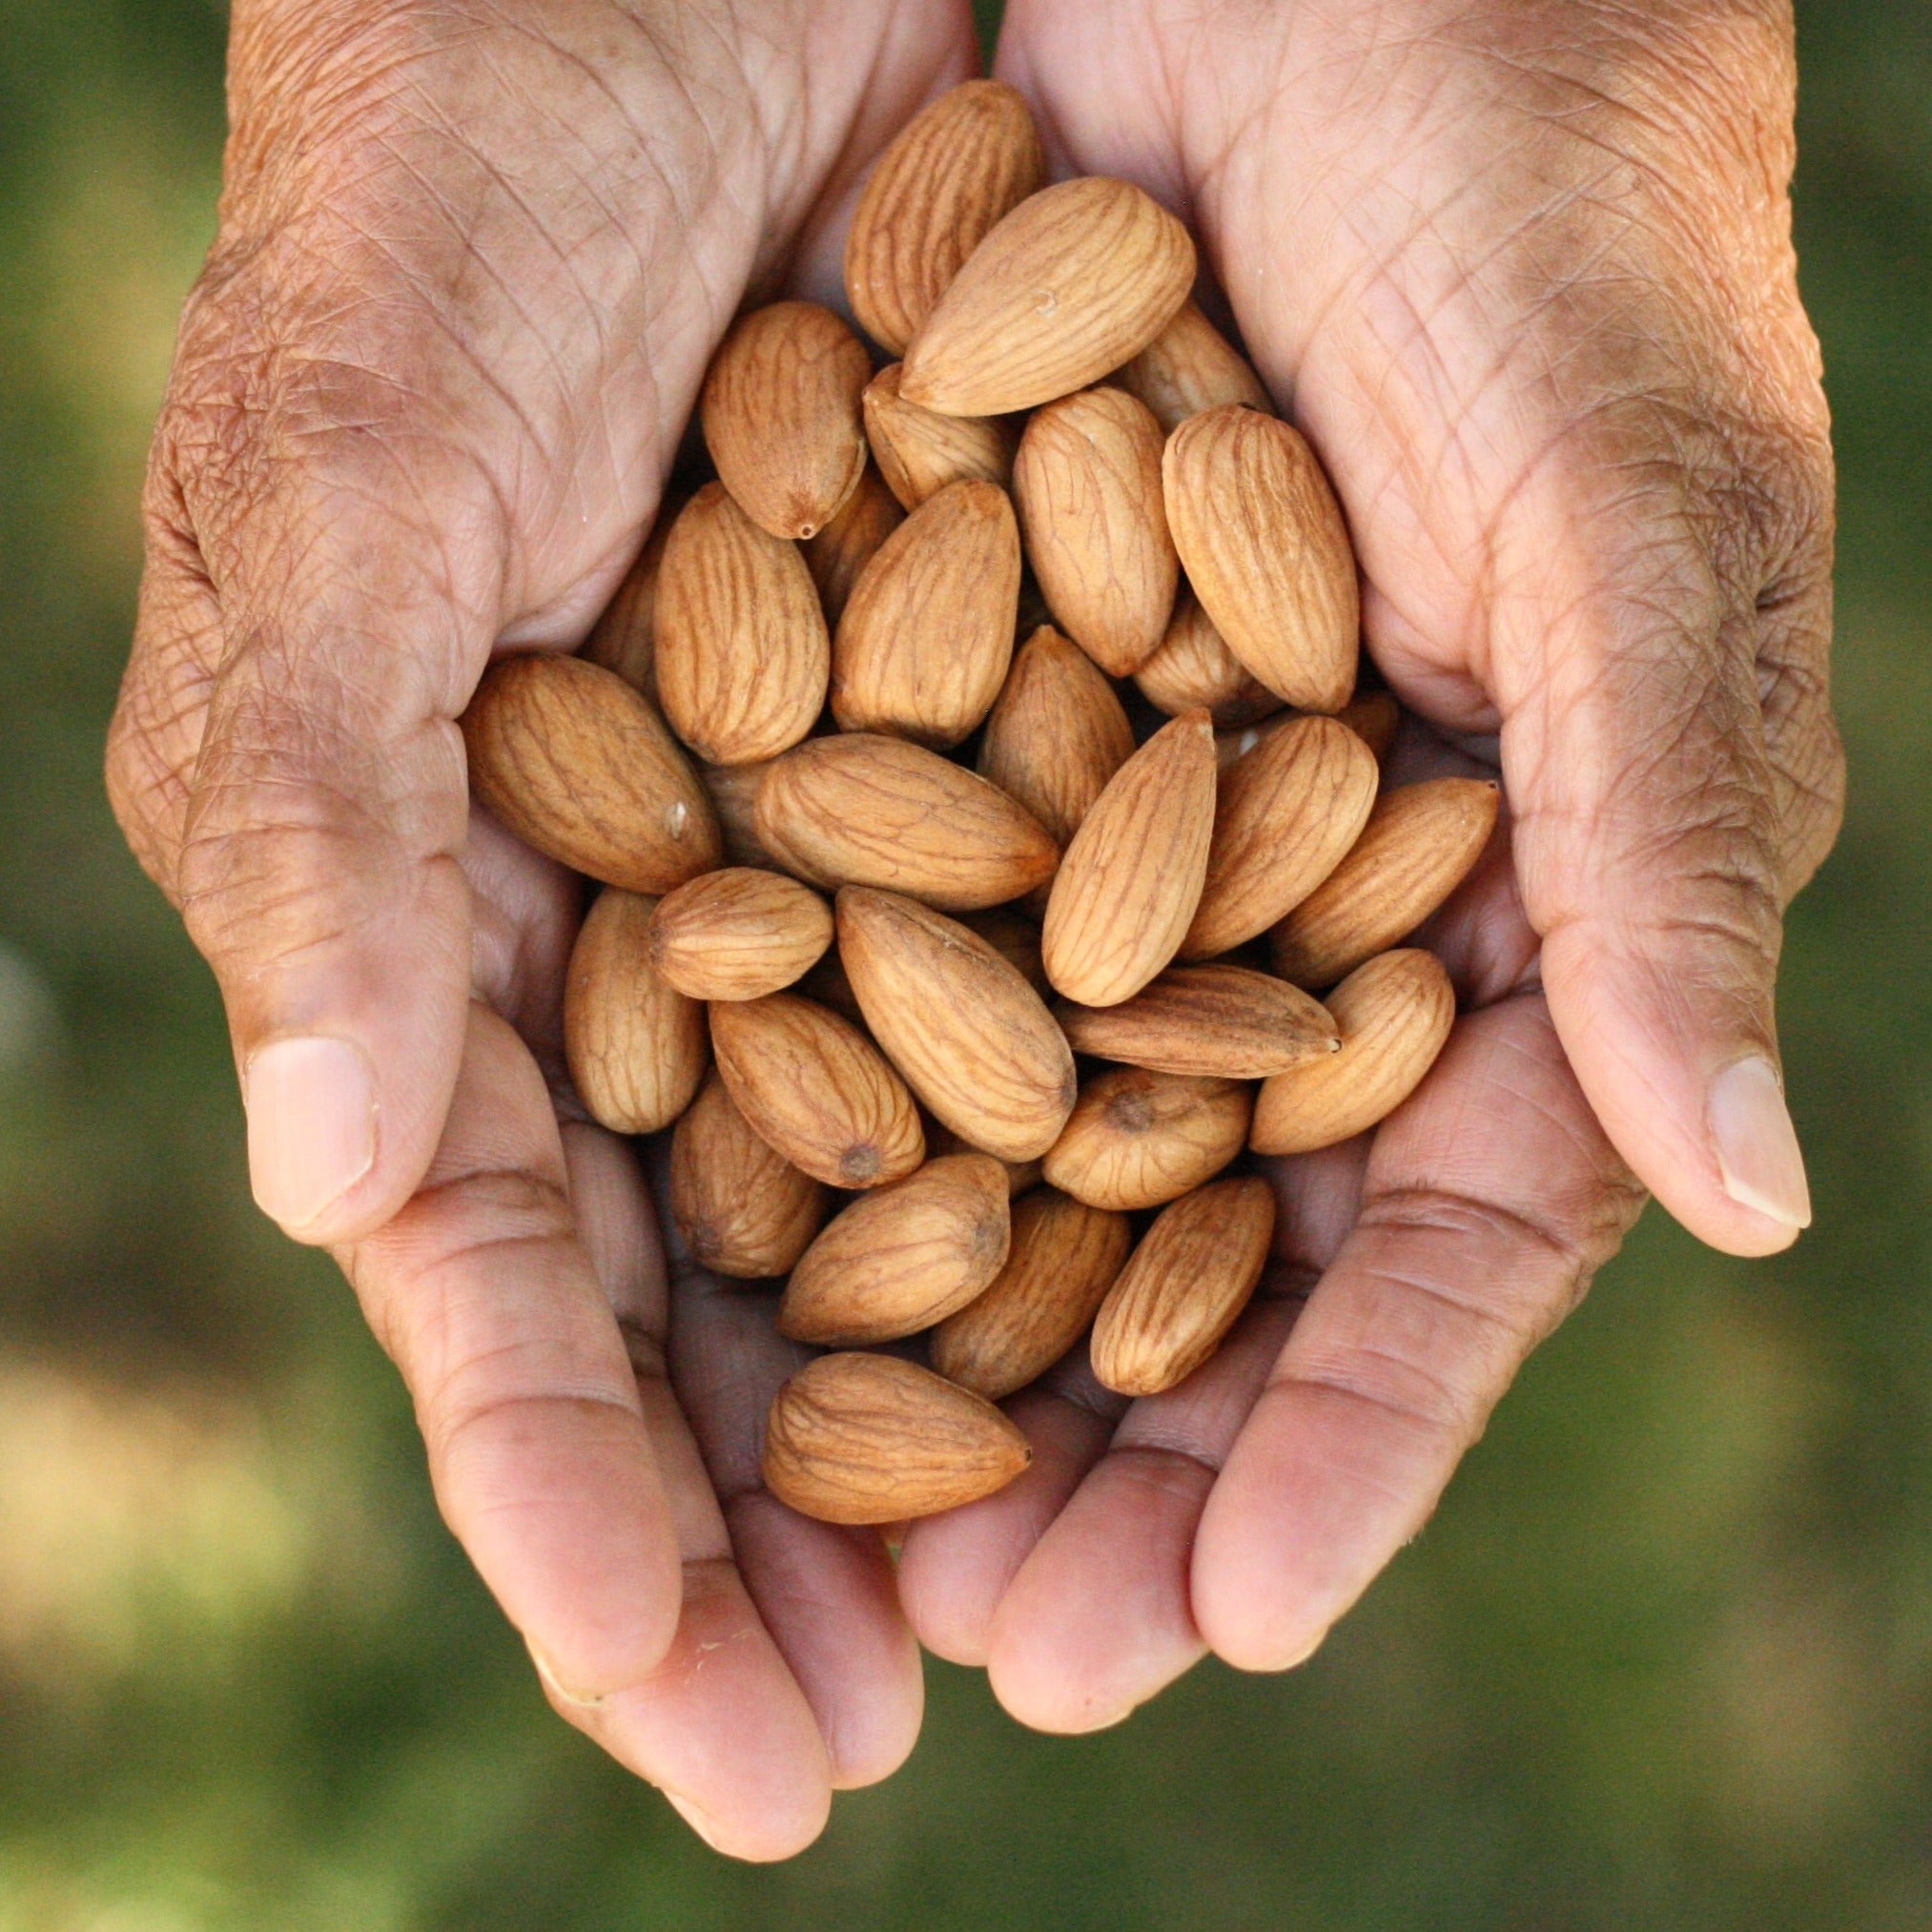 Australian sprouted almonds from Australian